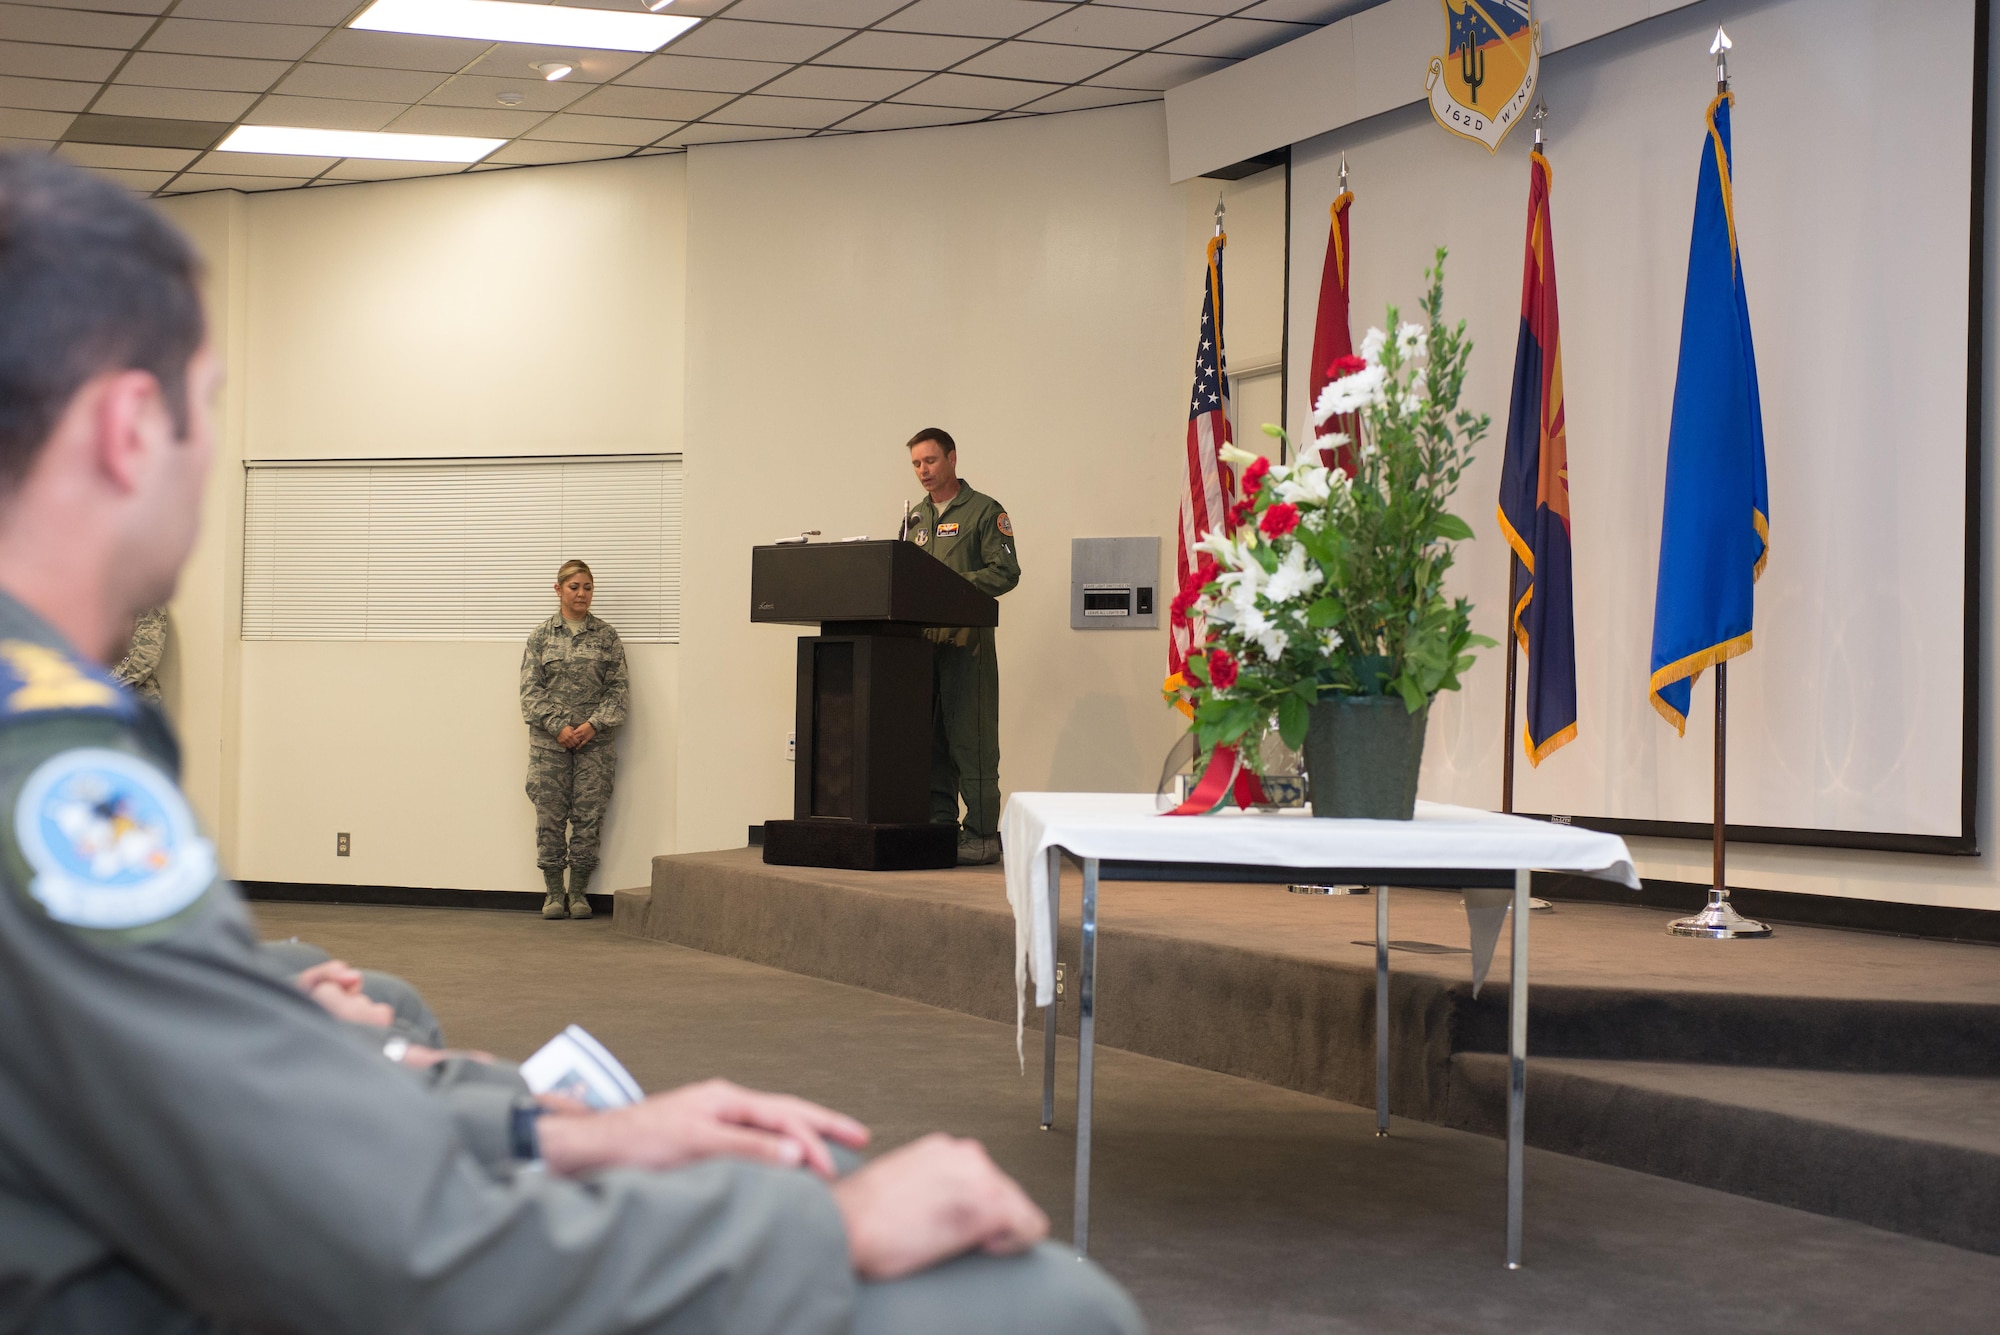 Director of Operations for the 152nd Fighter Squadron Detachment 1, Lt. Col. Jason Lewis speaks at a memorial service here Sept. 19.  “He gave his life for God and country in preparation for battle with ISIS and any other threat that serves to alter peace and civility in Iraq.  We owe our utmost reverence, for he is a true hero,” said Lewis.  “Know your bothers will take it from here and will ensure your sacrifice was not made in vein.”  (U.S. Air National Guard Photo by 1st Lt. Lacey Roberts)